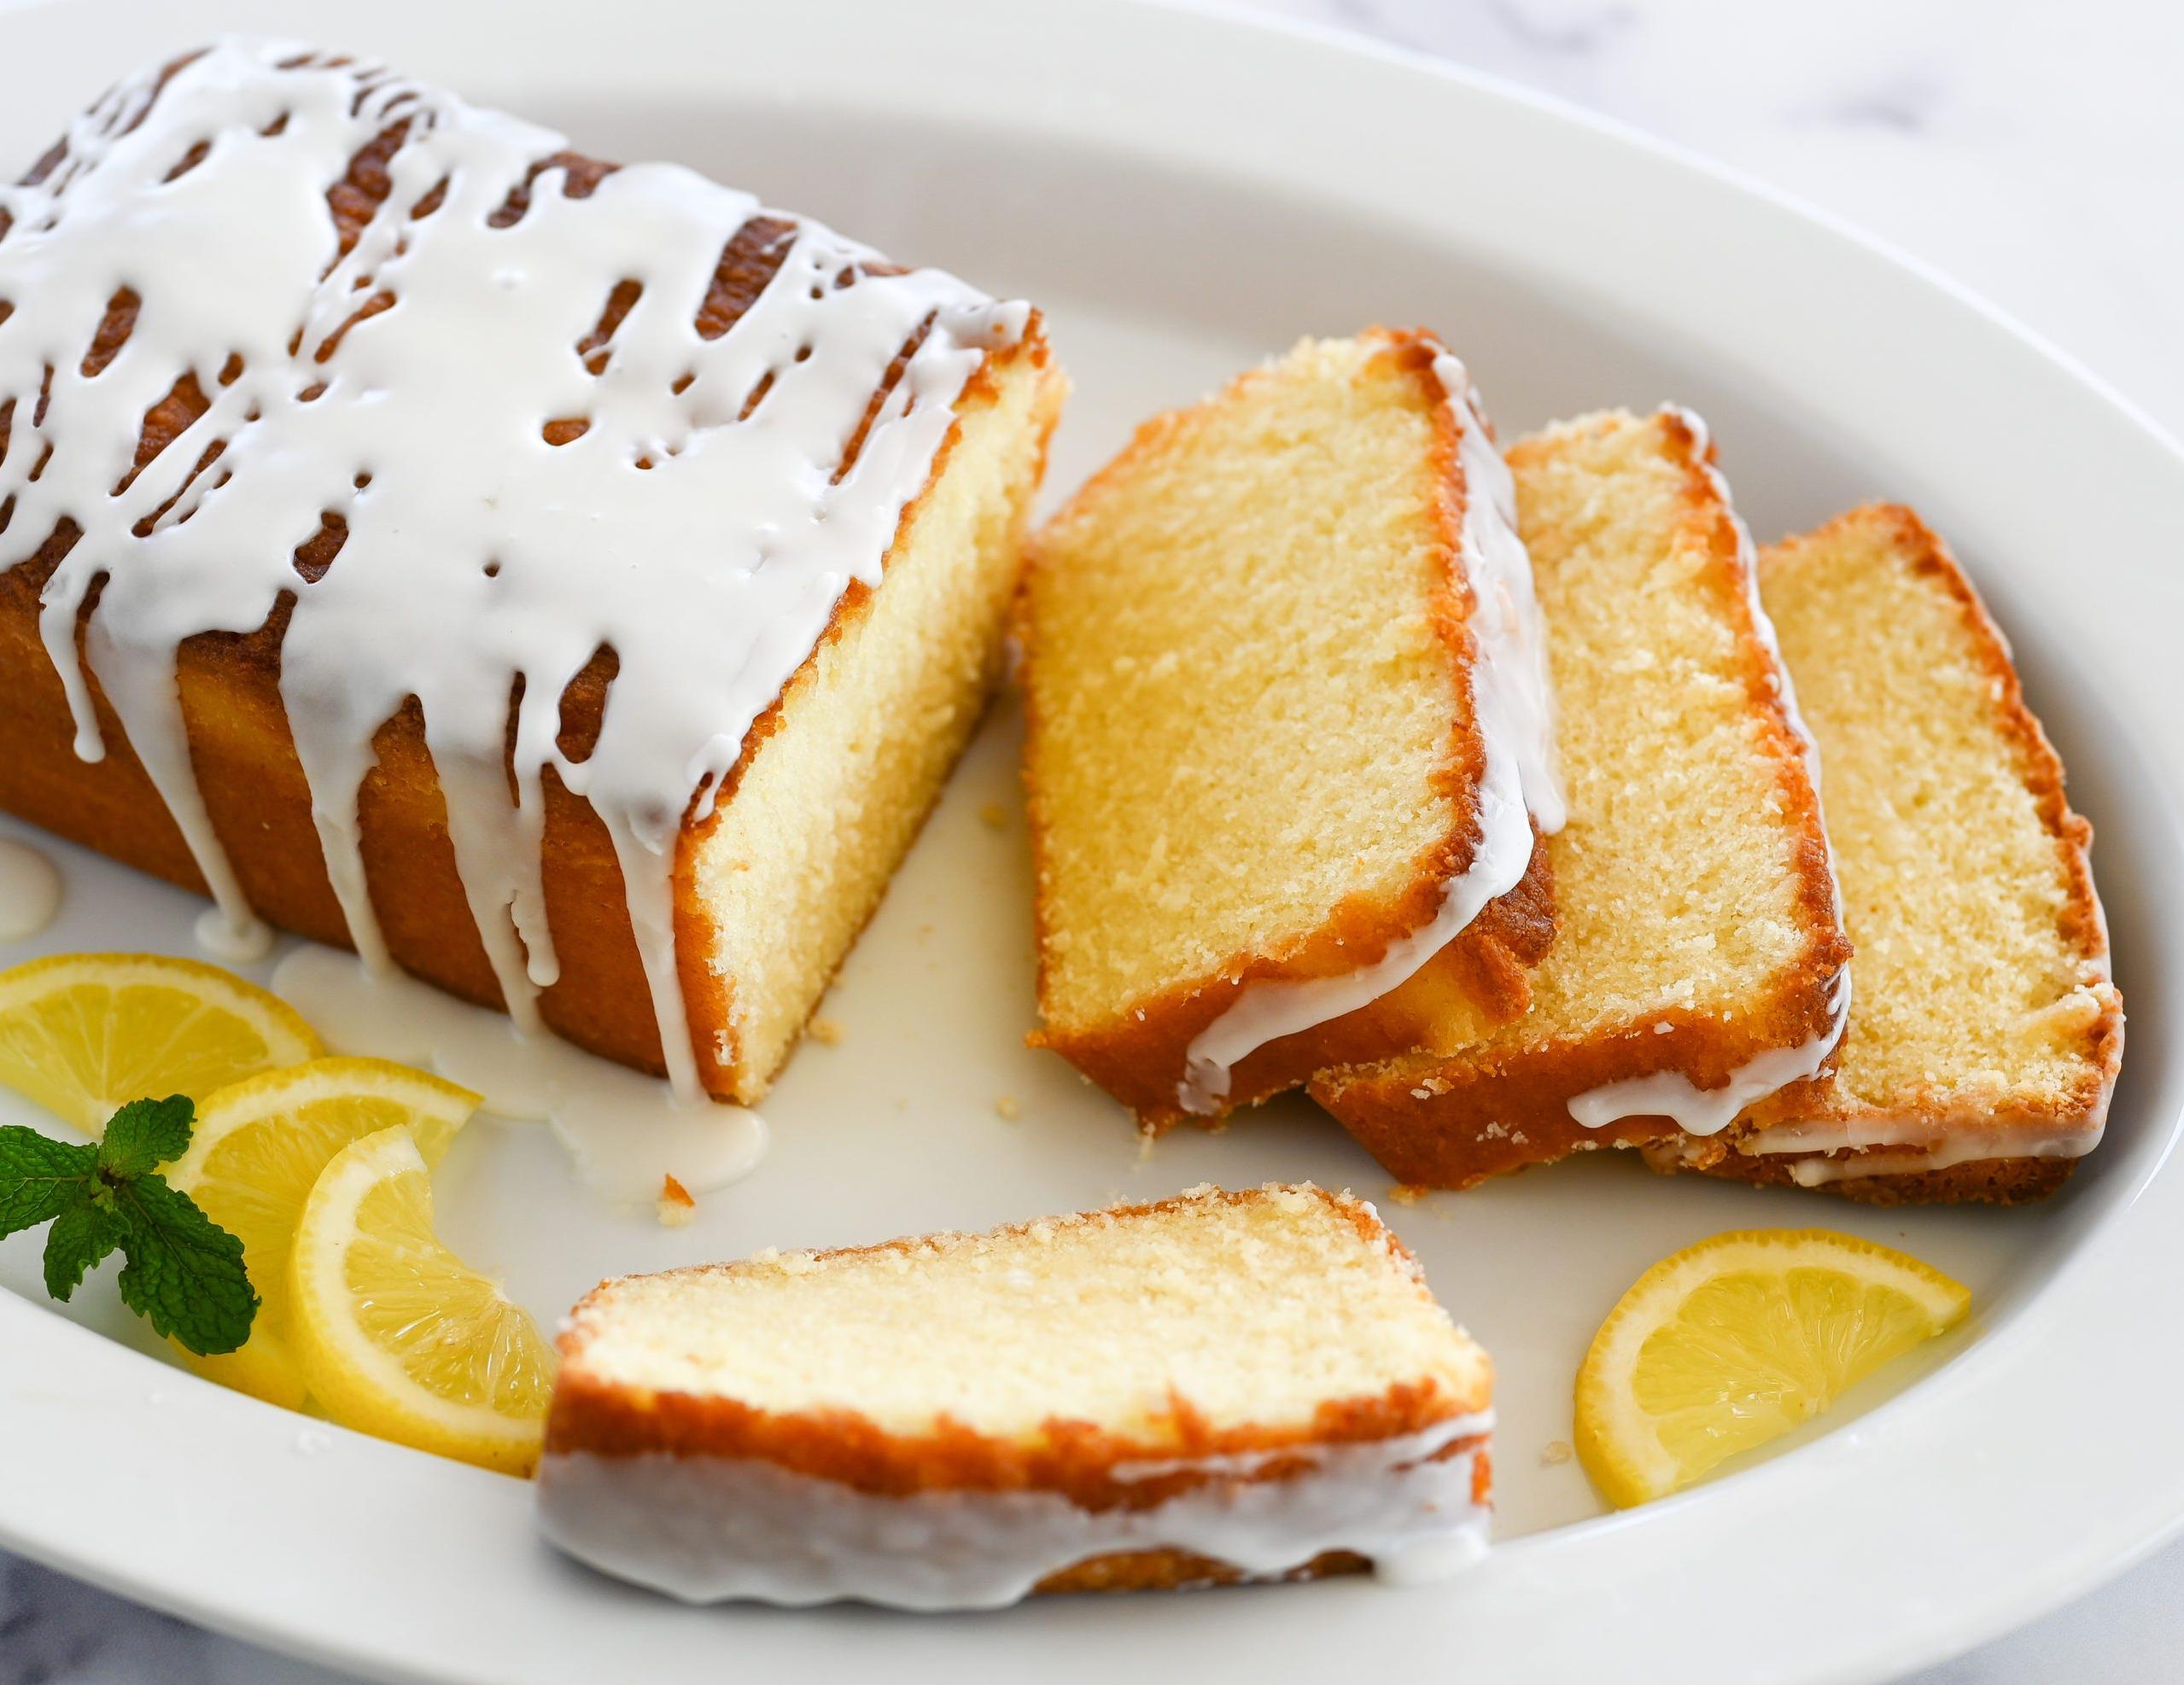  Satisfy your sweet tooth with this zesty lemon pound cake!